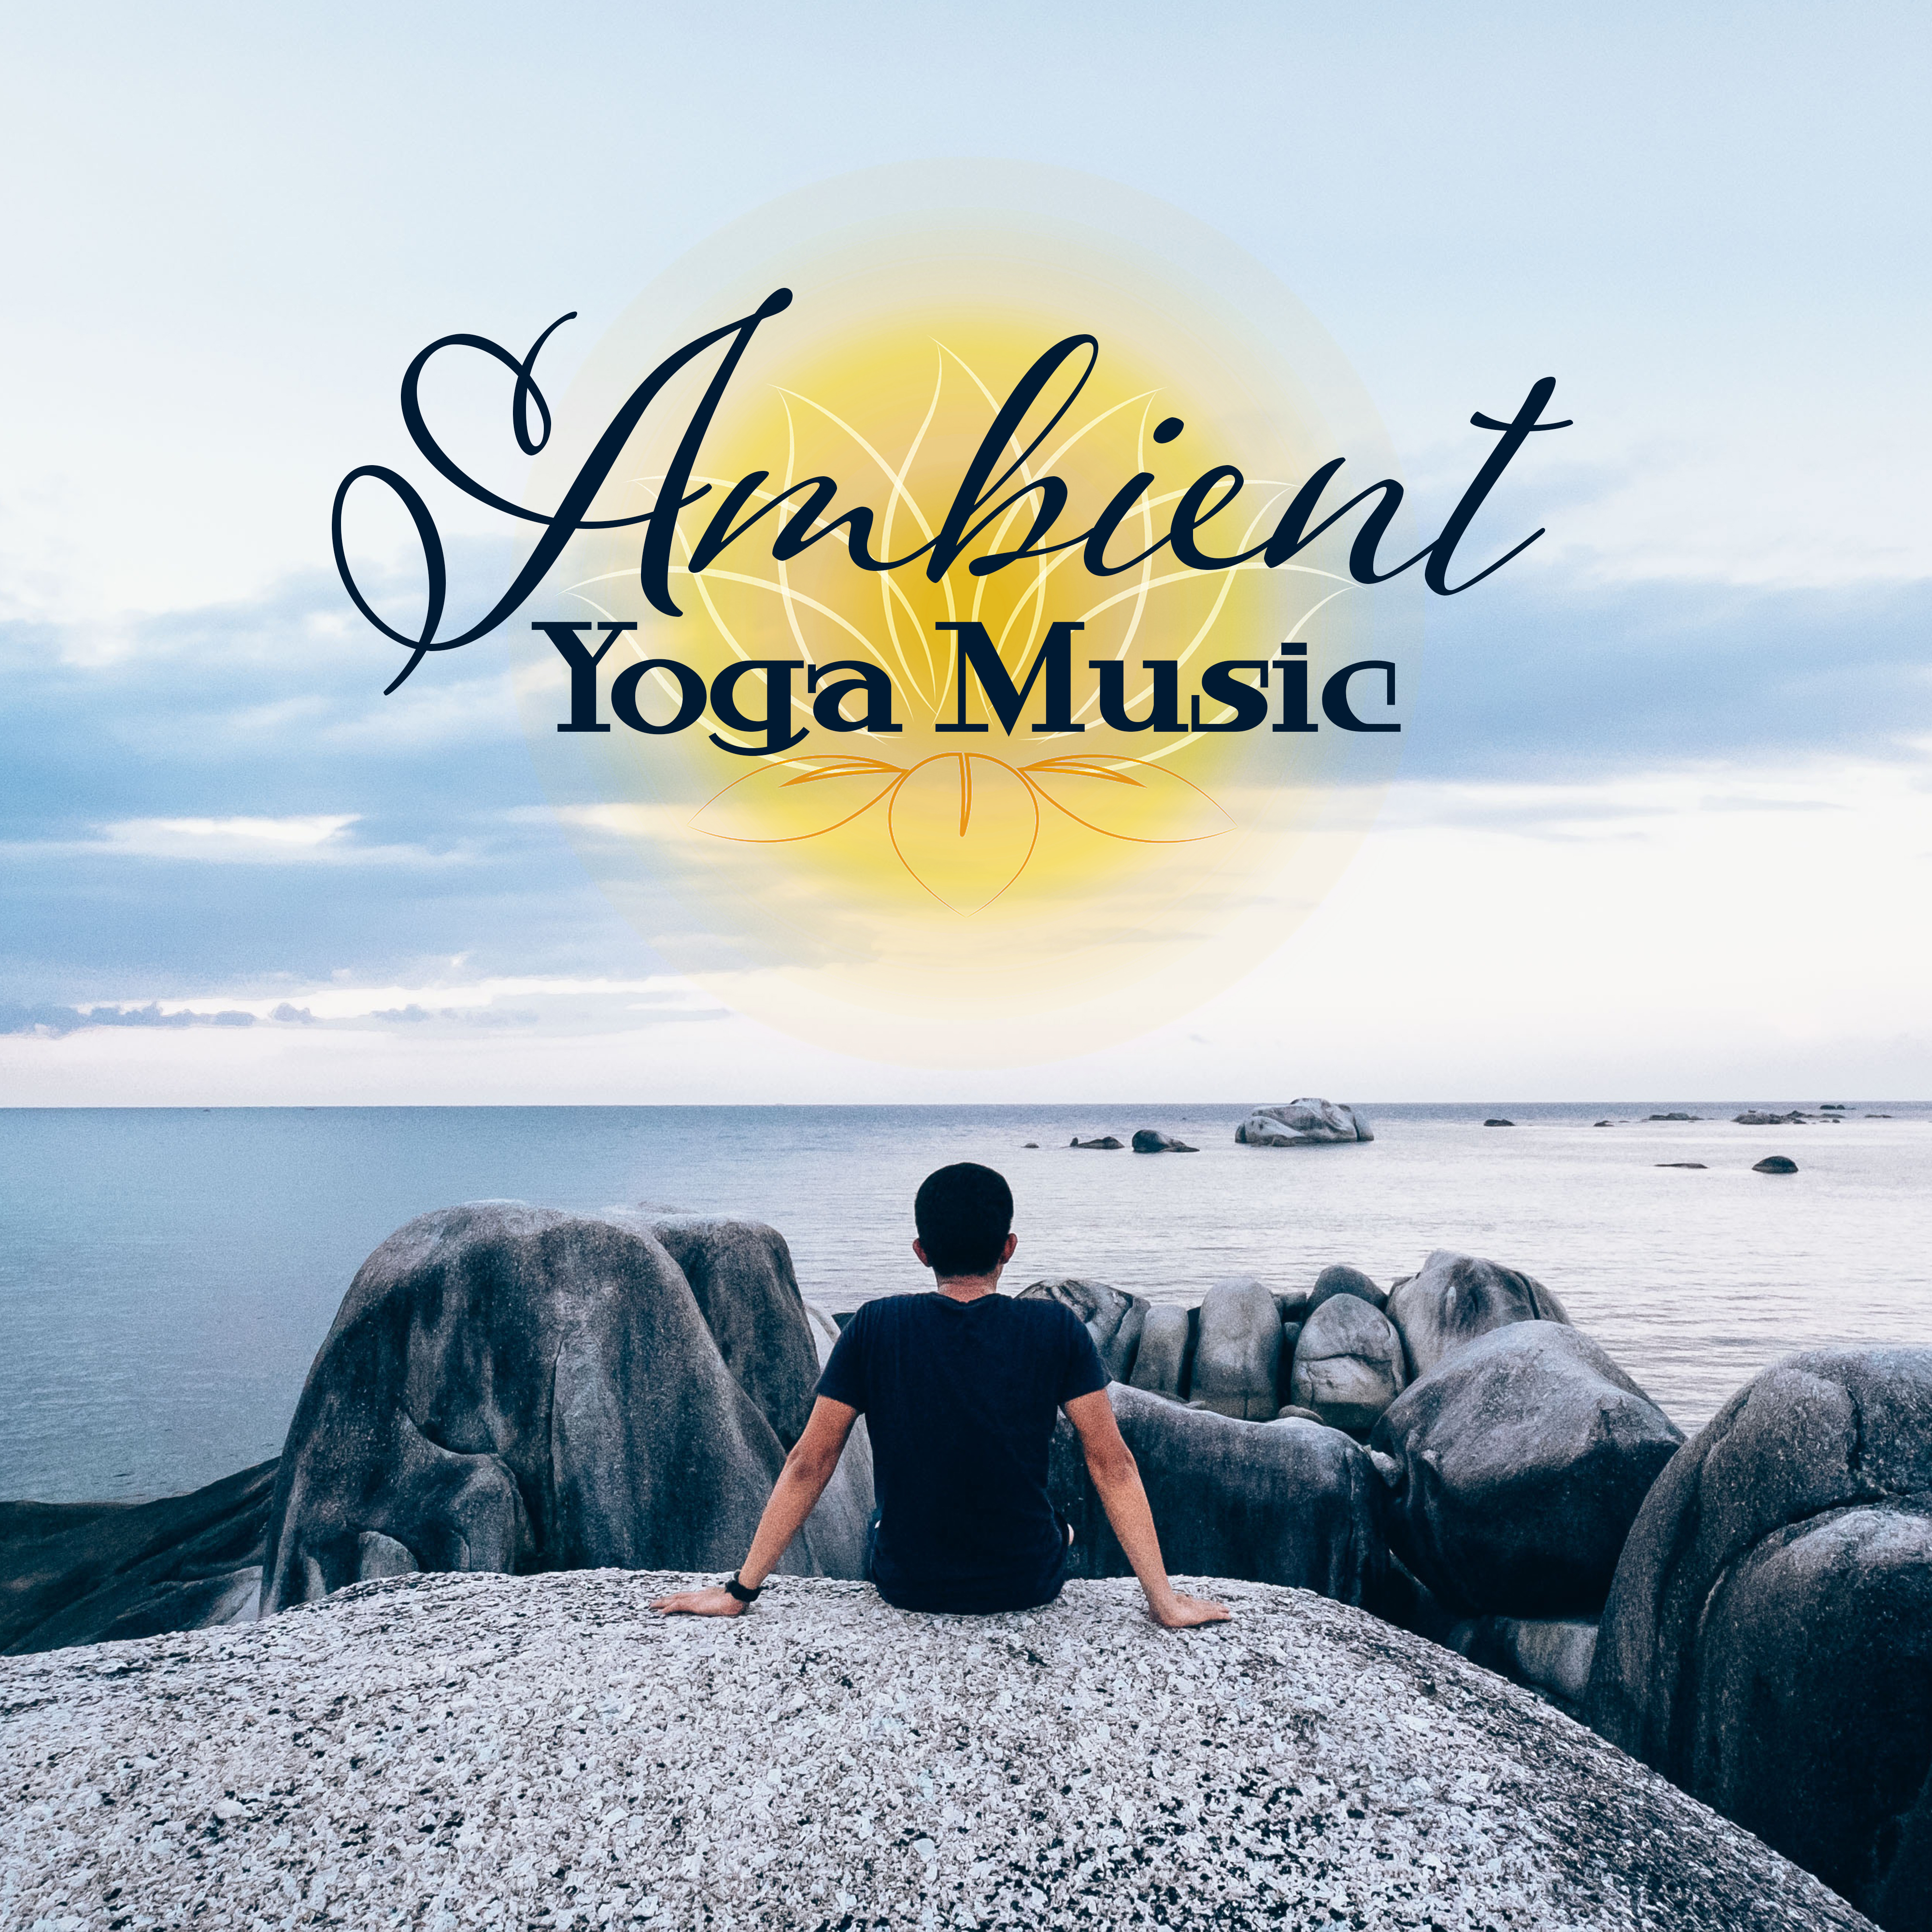 Ambient Yoga Music – New Age Songs for Meditation, Yoga Practice, Workout, Zen, Healing Bliss